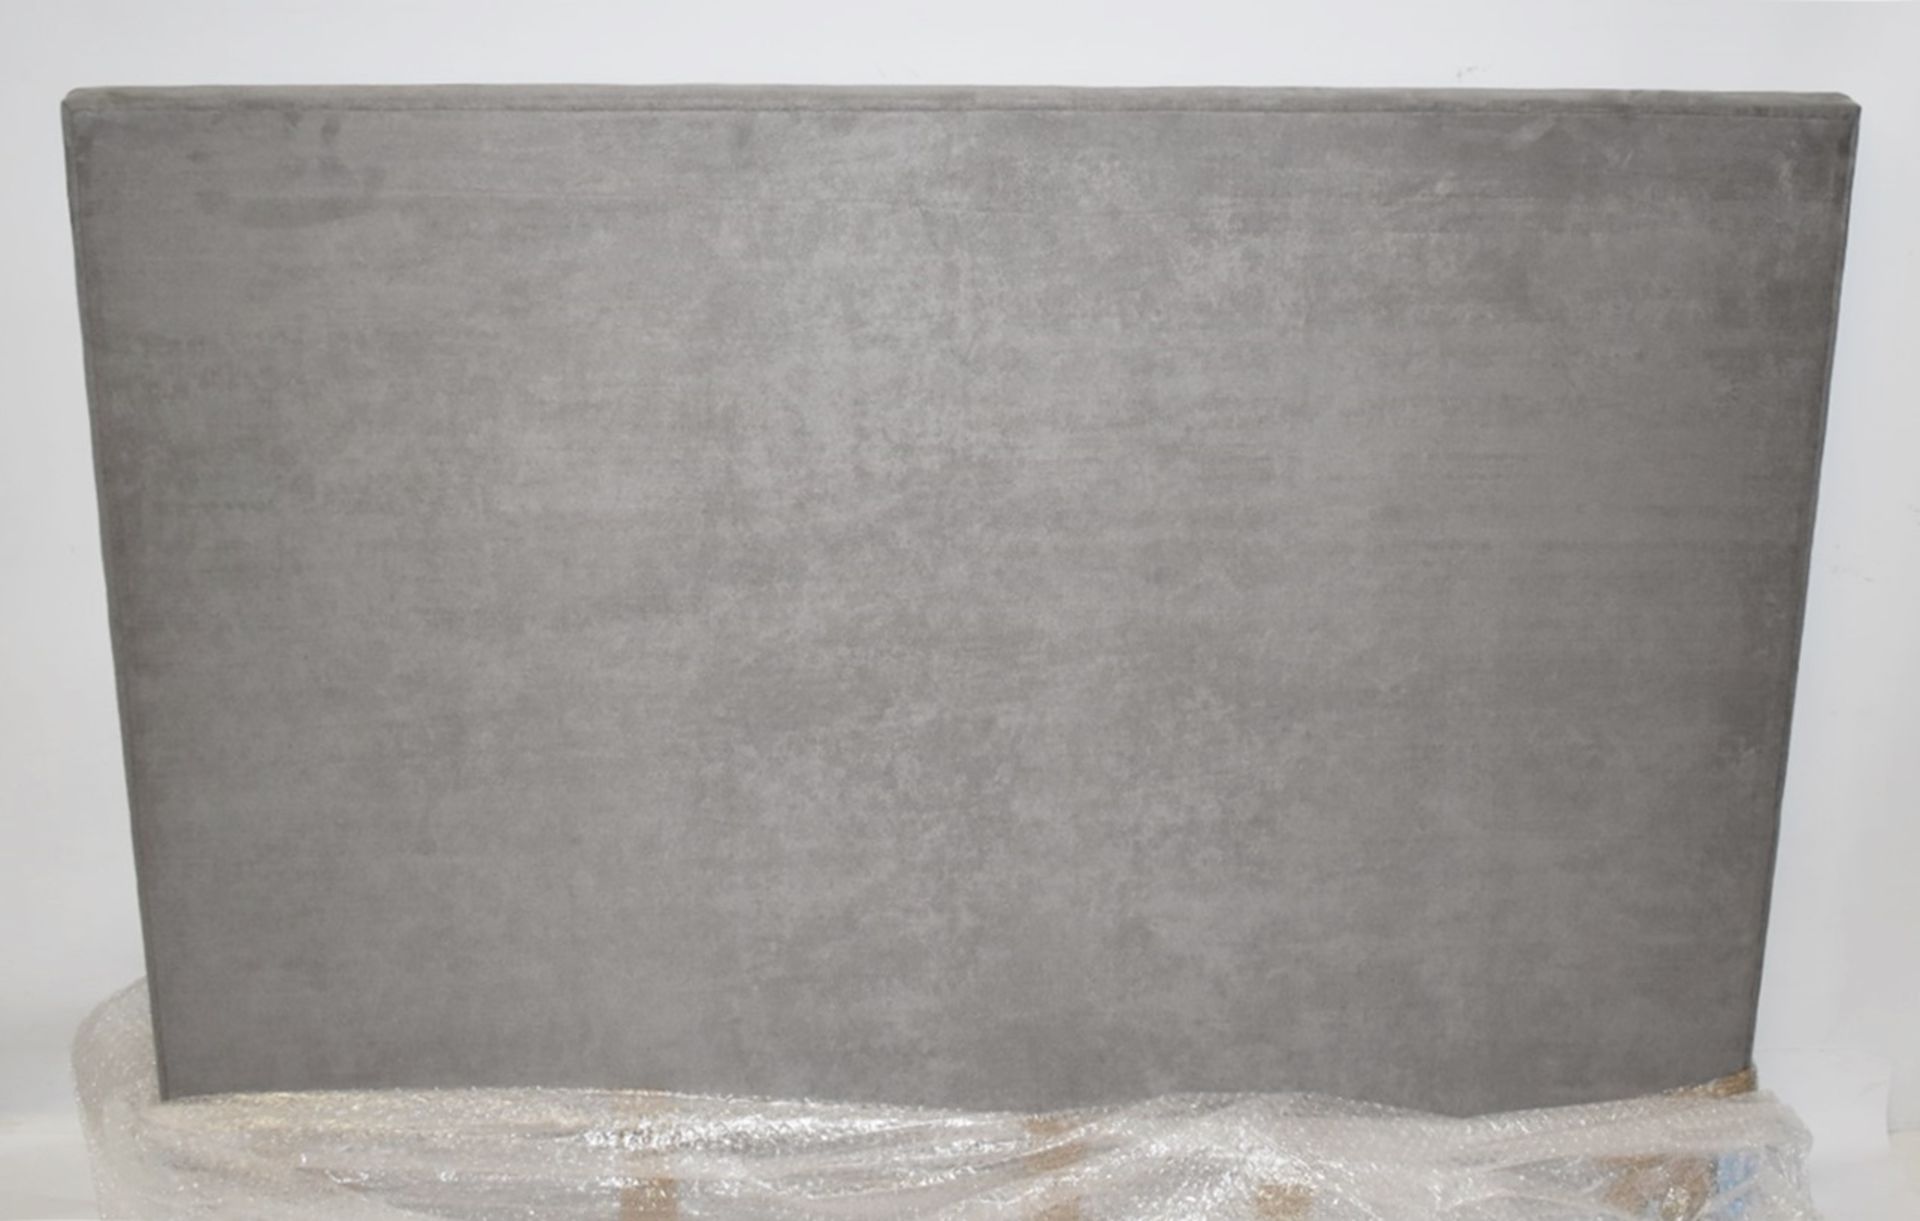 1 x VISPRING 'Hera' Luxury Handcrafted Double Headboard In A Grey Faux Suede - British Made - Image 6 of 6